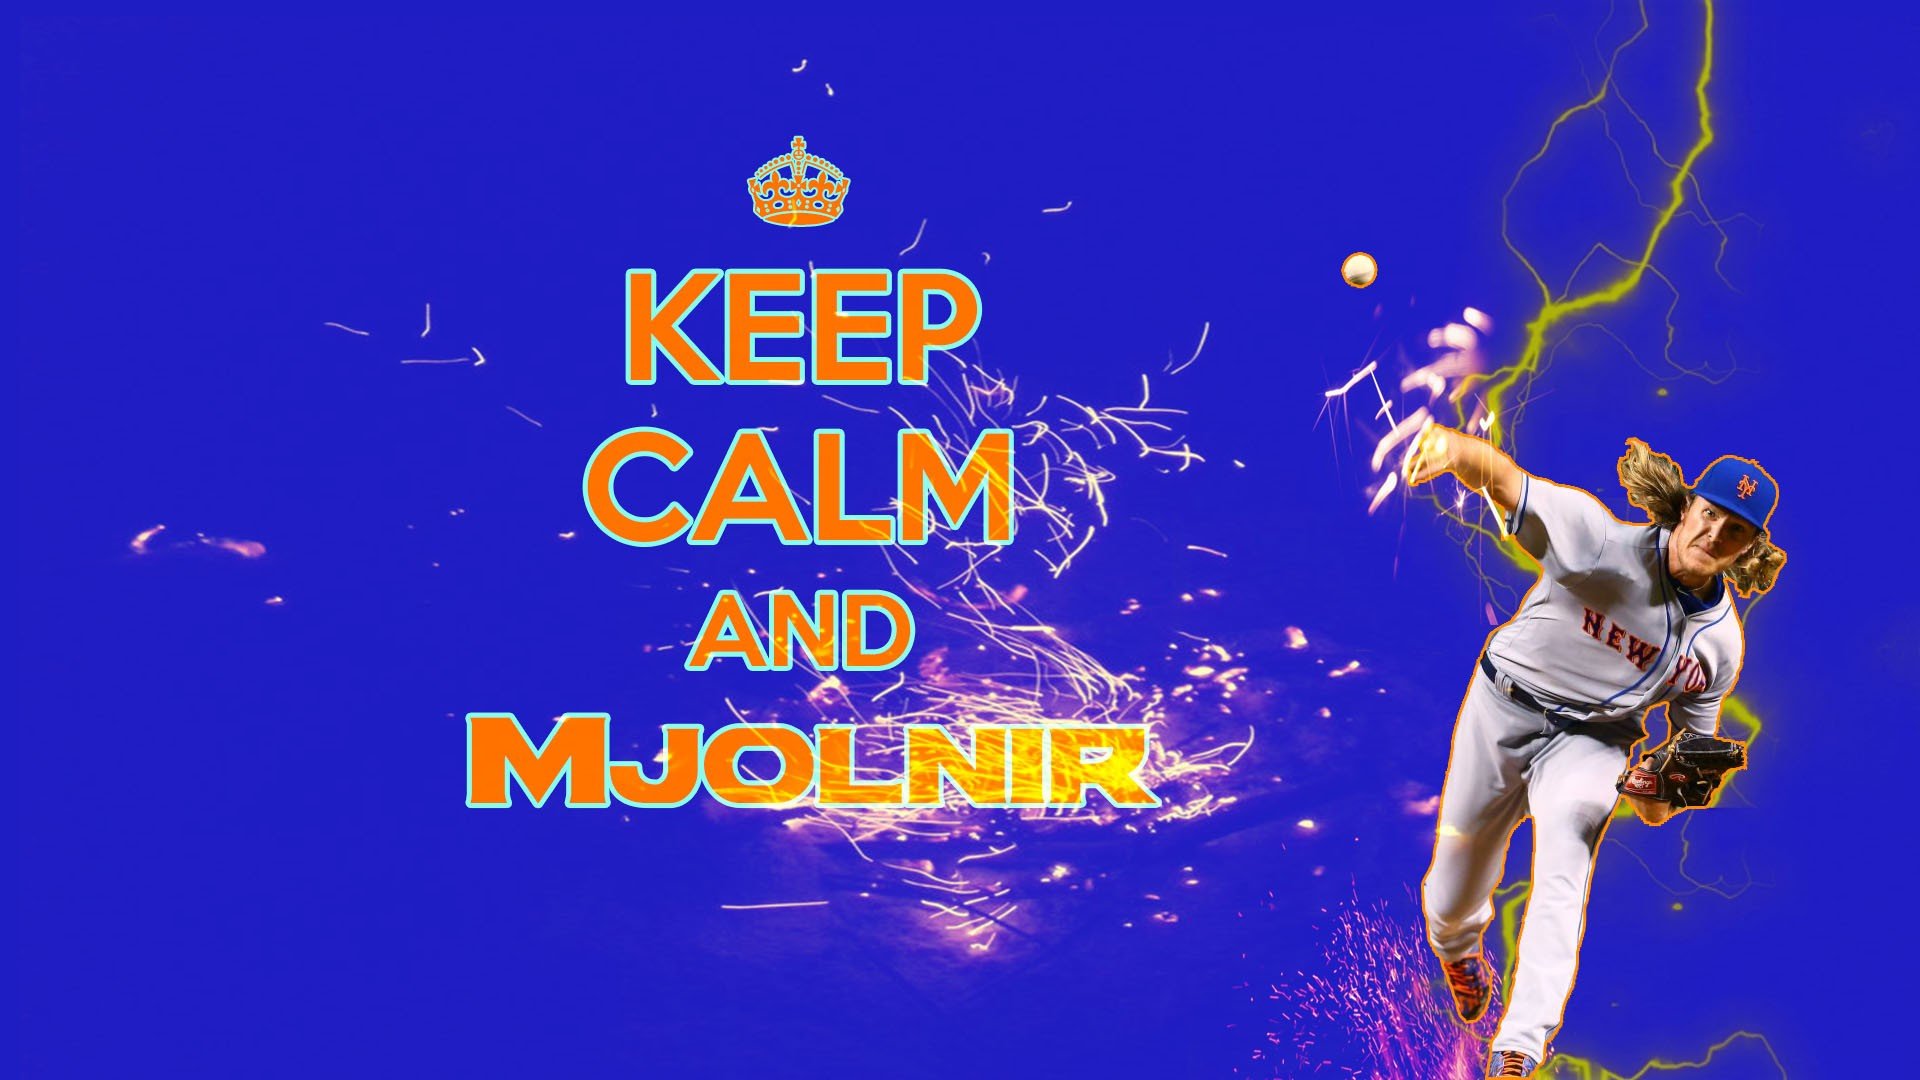 baseball, Syndergaard, Sports, New York Mets, Keep Calm and... Wallpaper